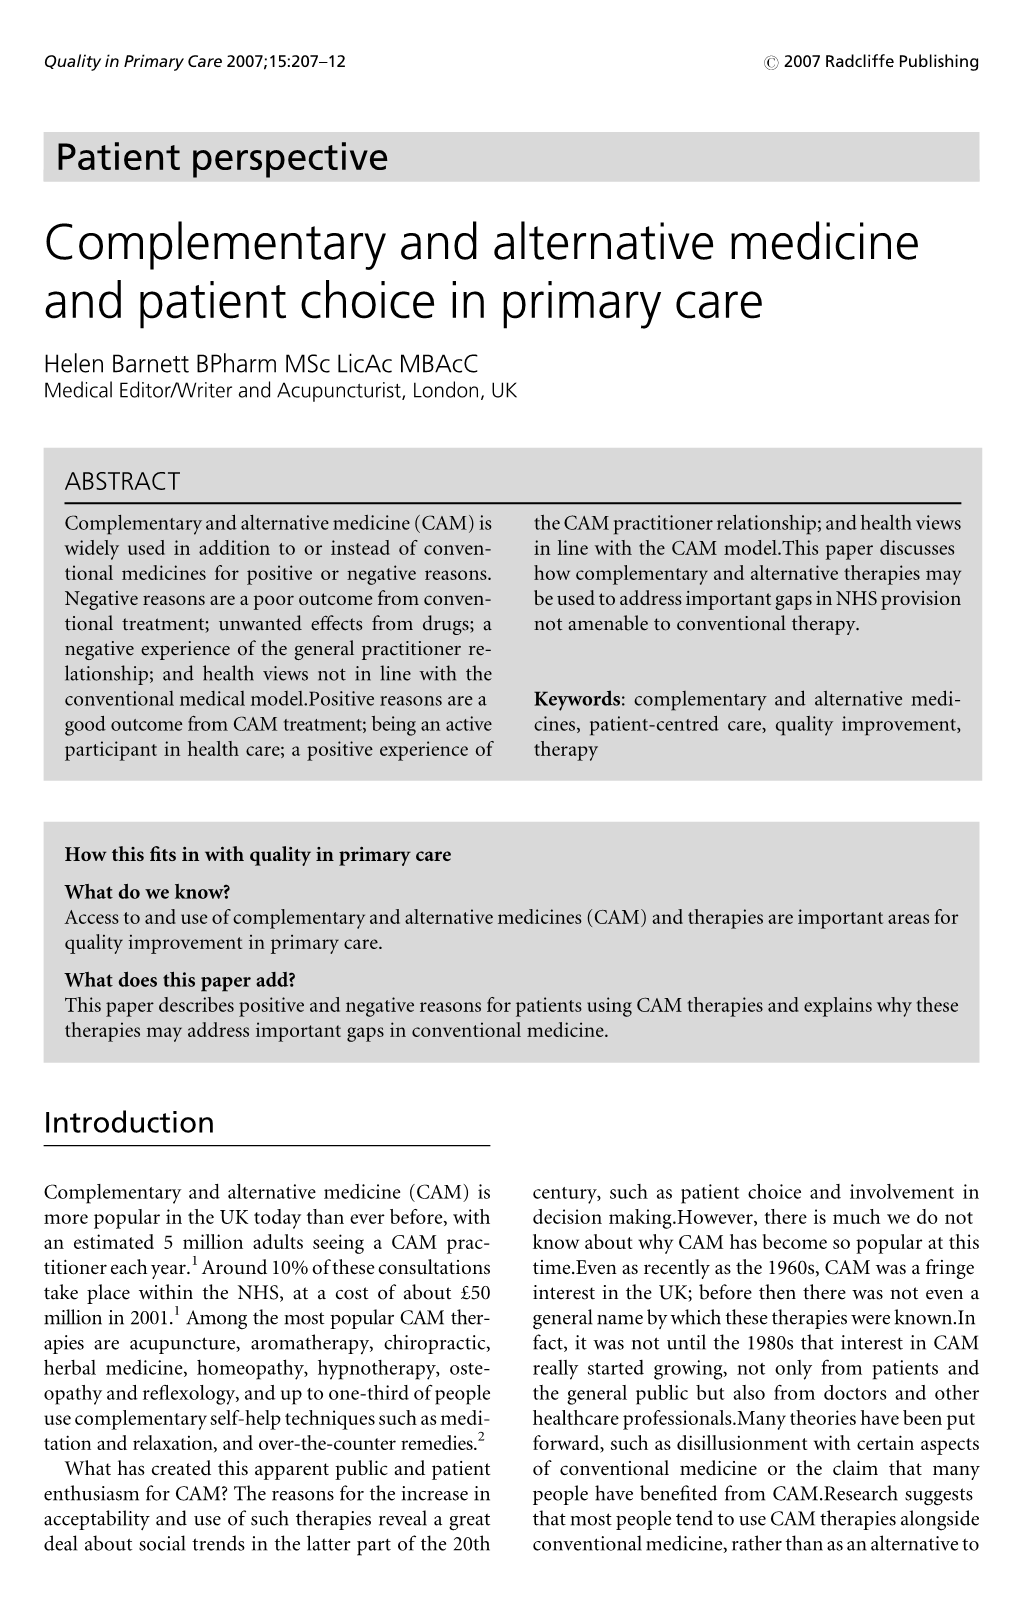 Complementary and Alternative Medicine and Patient Choice in Primary Care Helen Barnett Bpharm Msc Licac Mbacc Medical Editor/Writer and Acupuncturist, London, UK